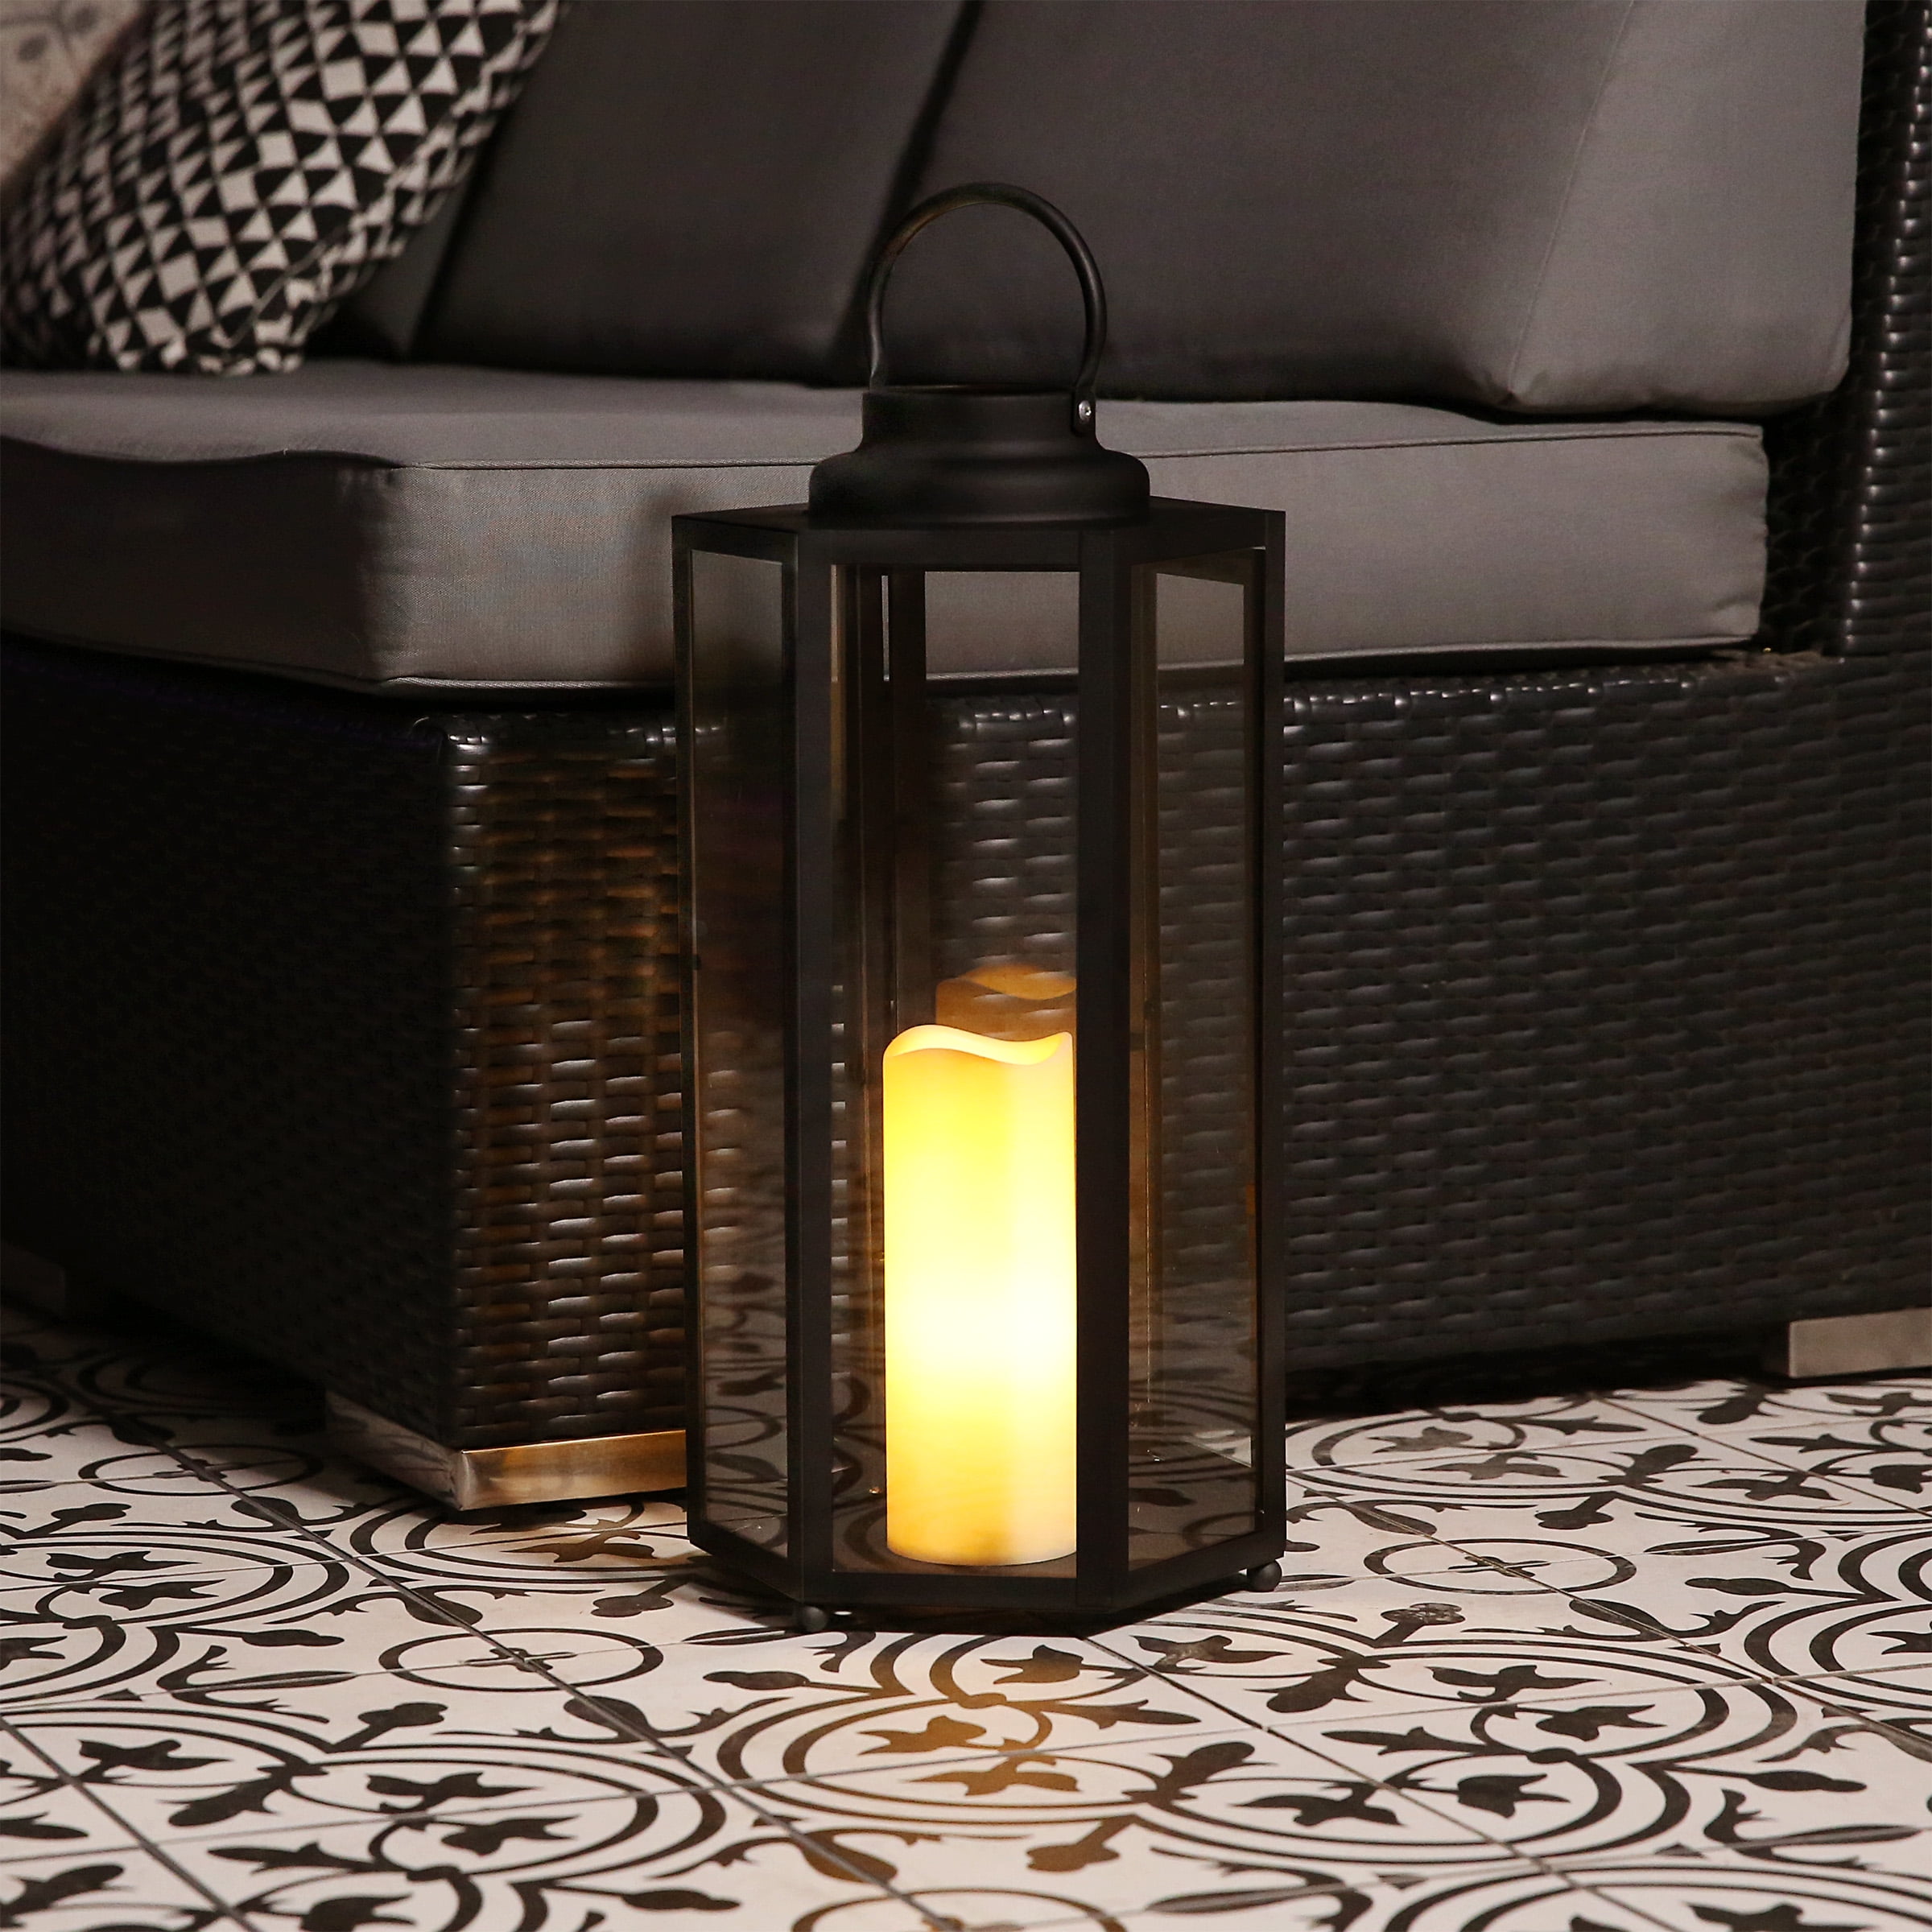 Picture of Alpine IVY104HH-L Black Hexagonal Candlelit Lantern with Warm White LEDs - Large